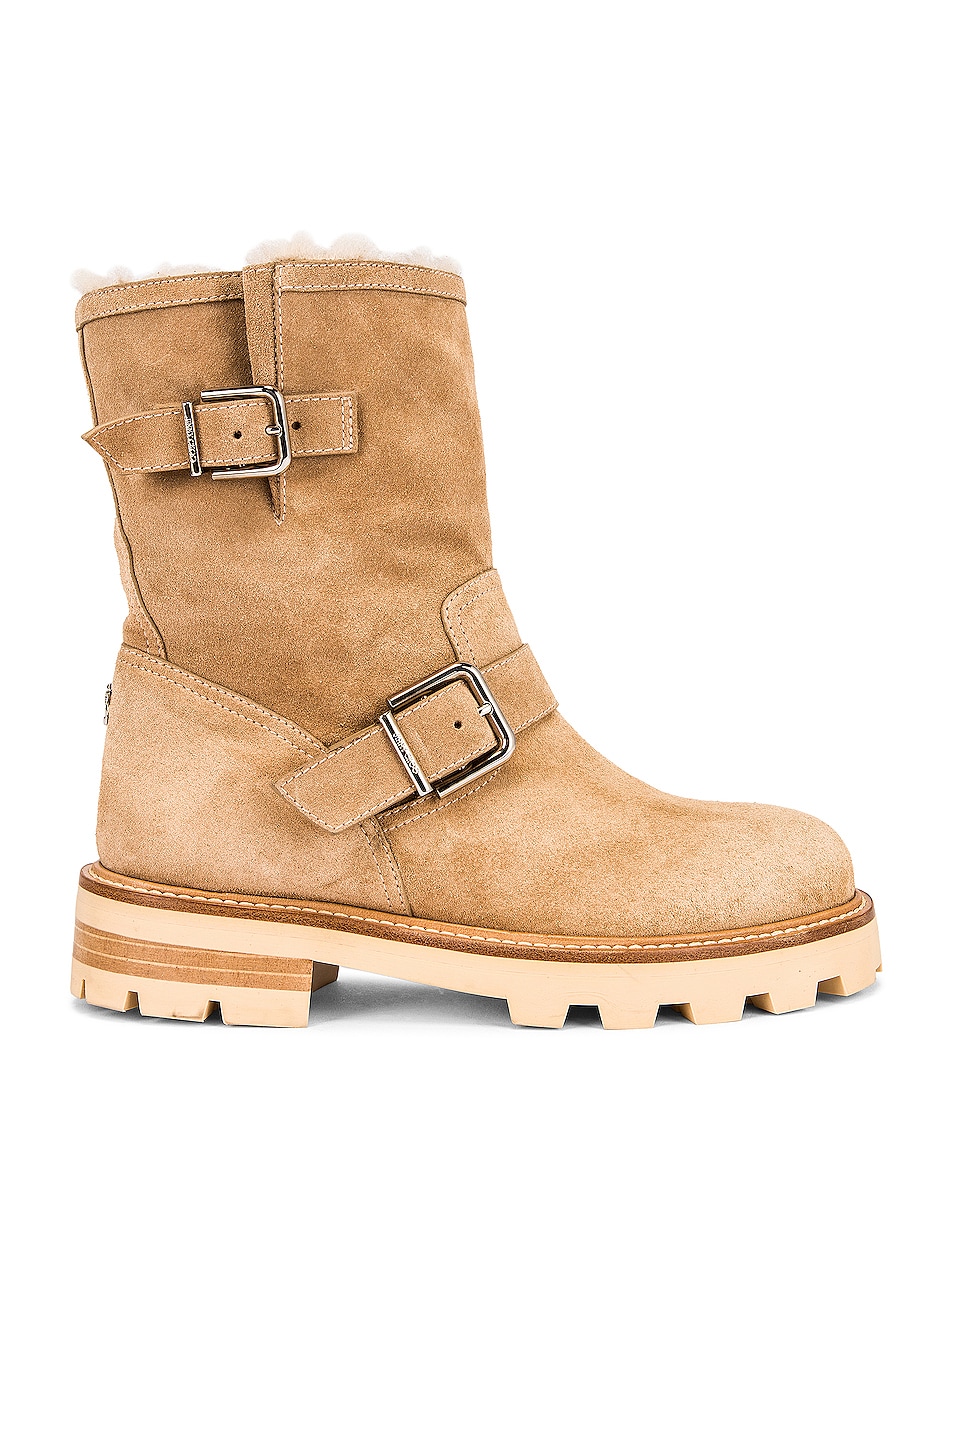 Image 1 of Jimmy Choo Youth II Shearling Lined Suede Boot in Stucco & Natural